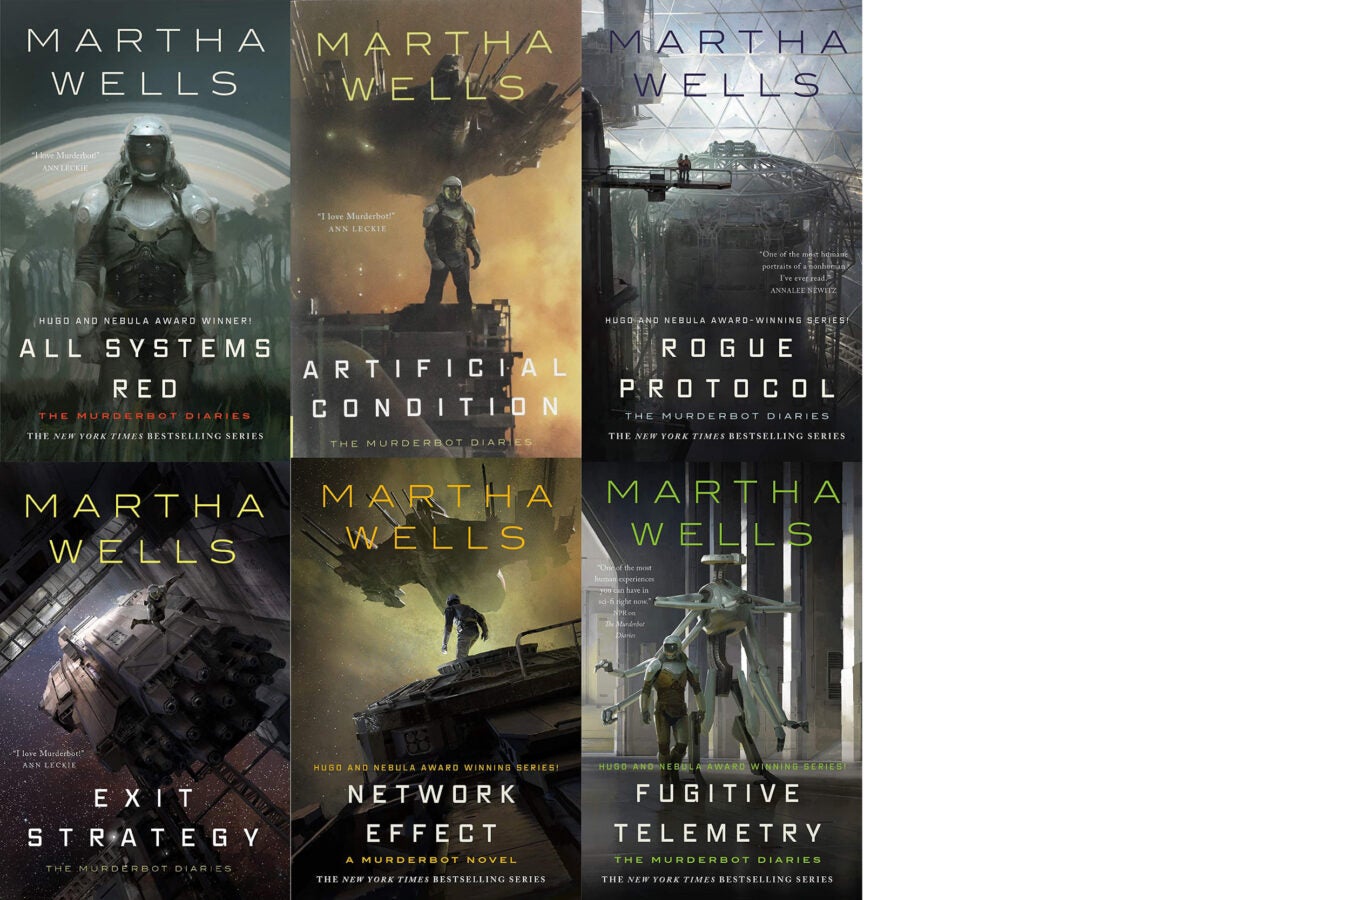 Book covers: “The Murderbot Diaries” (Series) by Martha Wells.